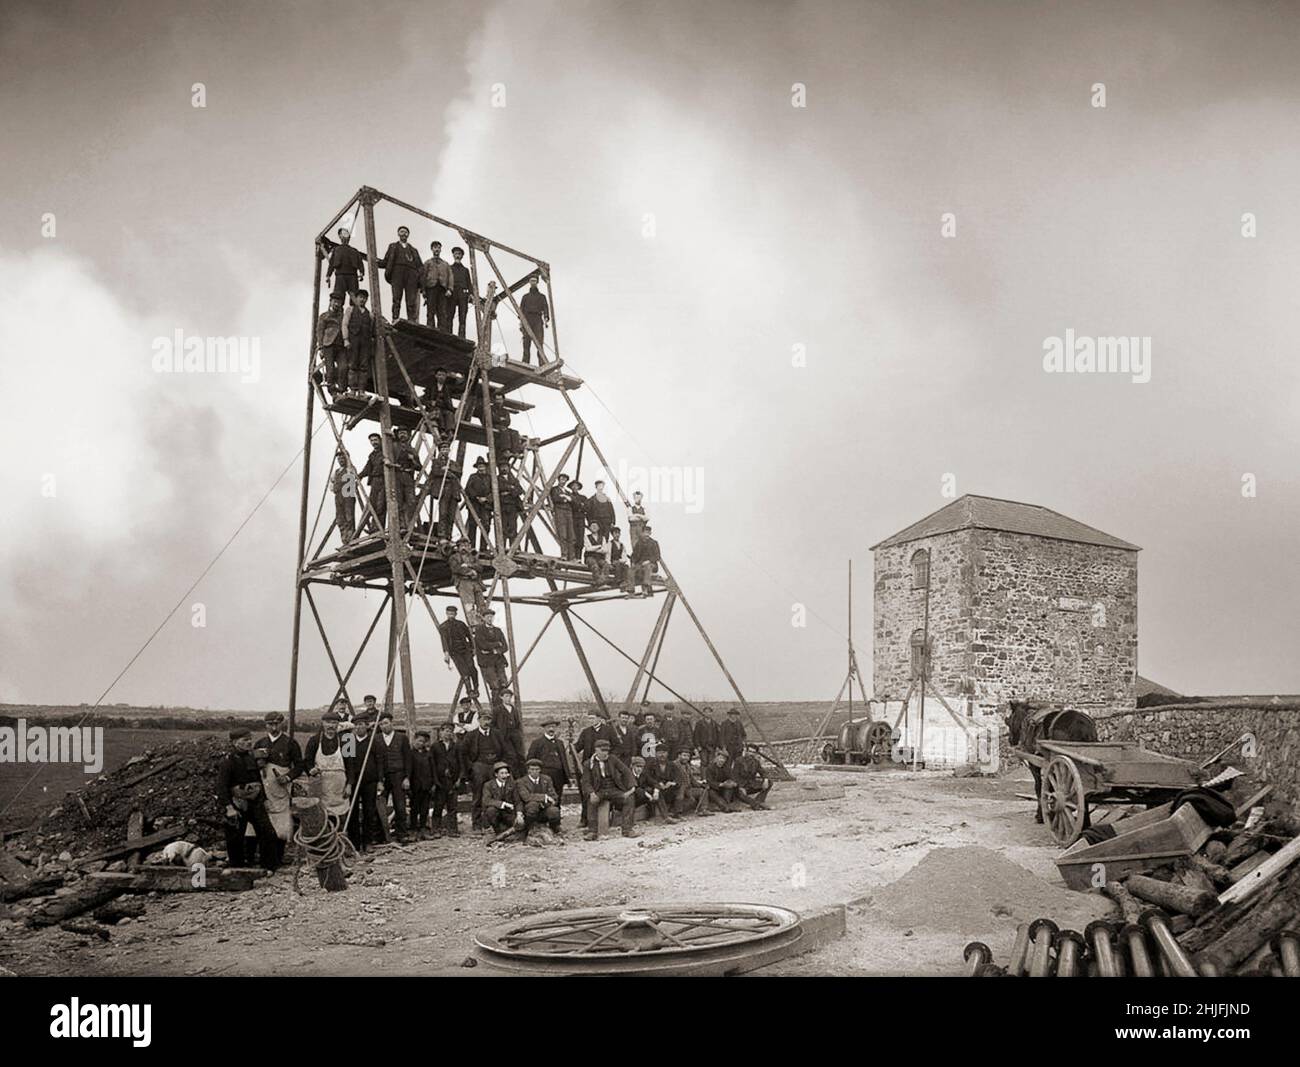 A vintage photograph of miners at Knockmahon, near Bunmahon, County Waterford, Ireland, shot on 1906. The The Mining Company of Ireland established in 1824 took leases on mineral areas all over the country. Knockmahon proved to be the most profitable of all their operations. By 1840 it was described  as ‘the most important — mining district in the (British) empire’. This proved to be the peak, and in their search for other lodes in the neighbourhood they discovered Tankardstown just as Knockmahon was threatening to flood. Stock Photo